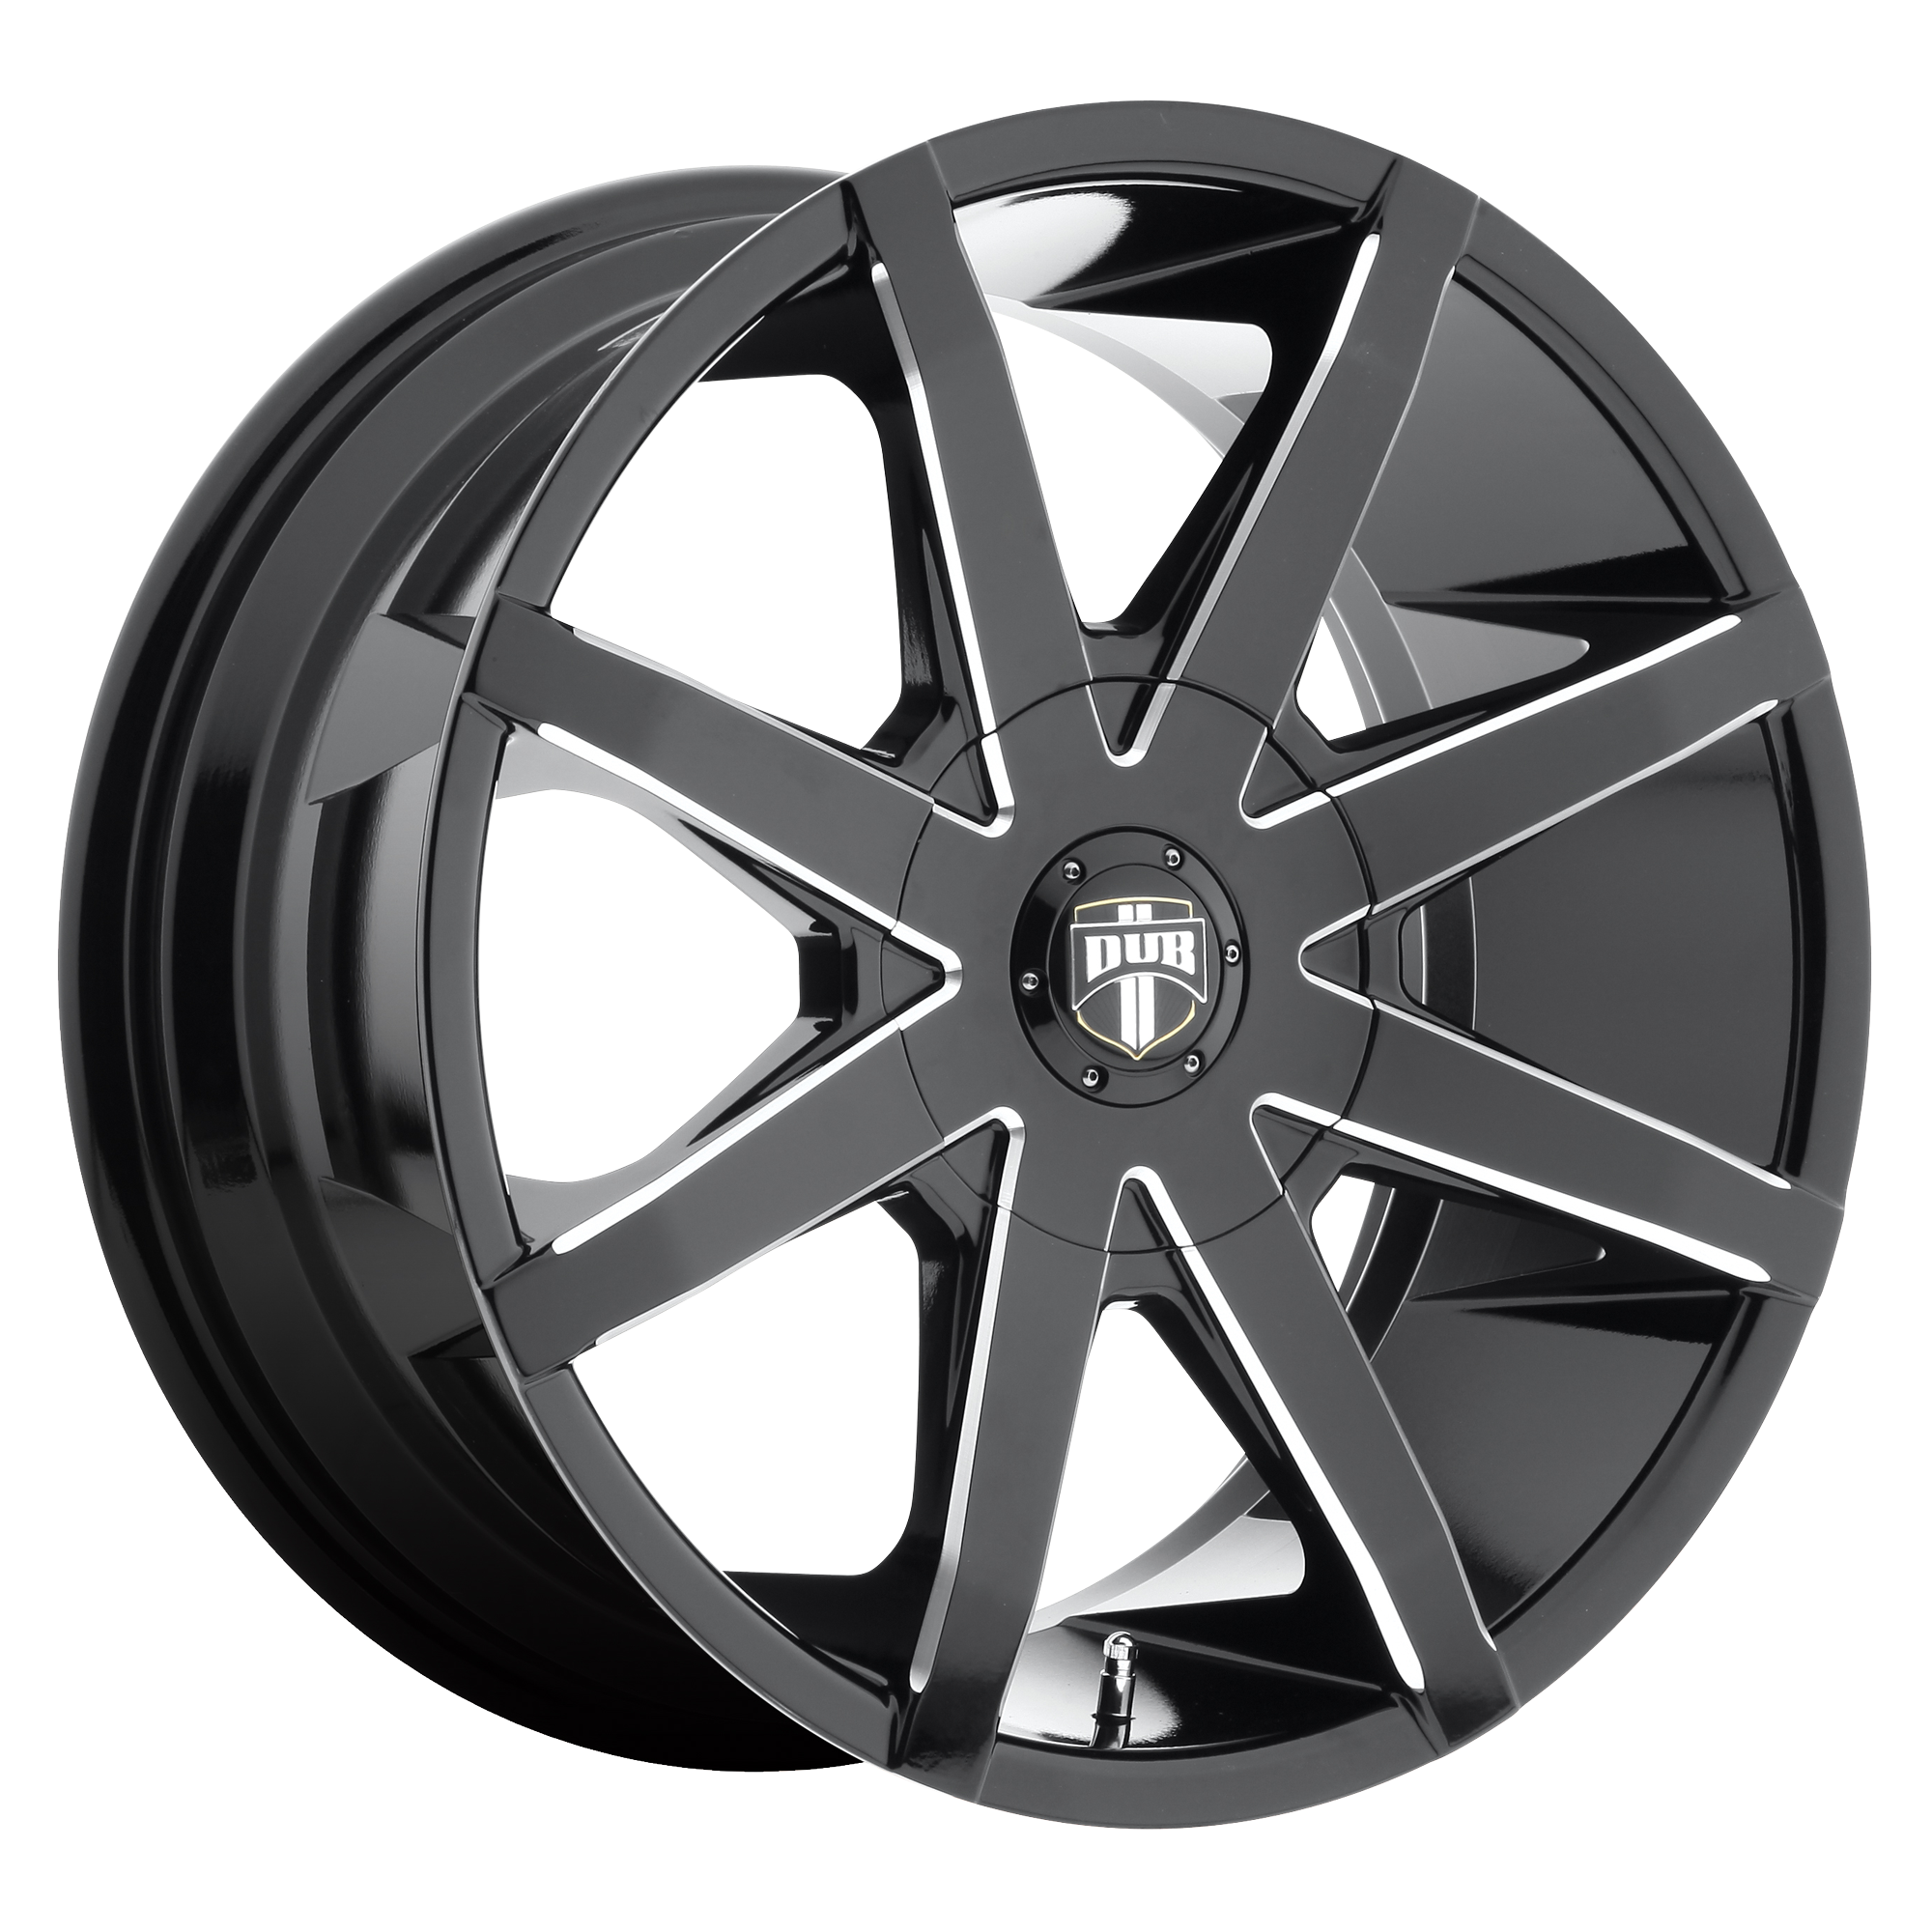 PUSH 20x8.5 5x115.00/5x120.65 GLOSS BLACK MILLED (10 mm) - Tires and Engine Performance